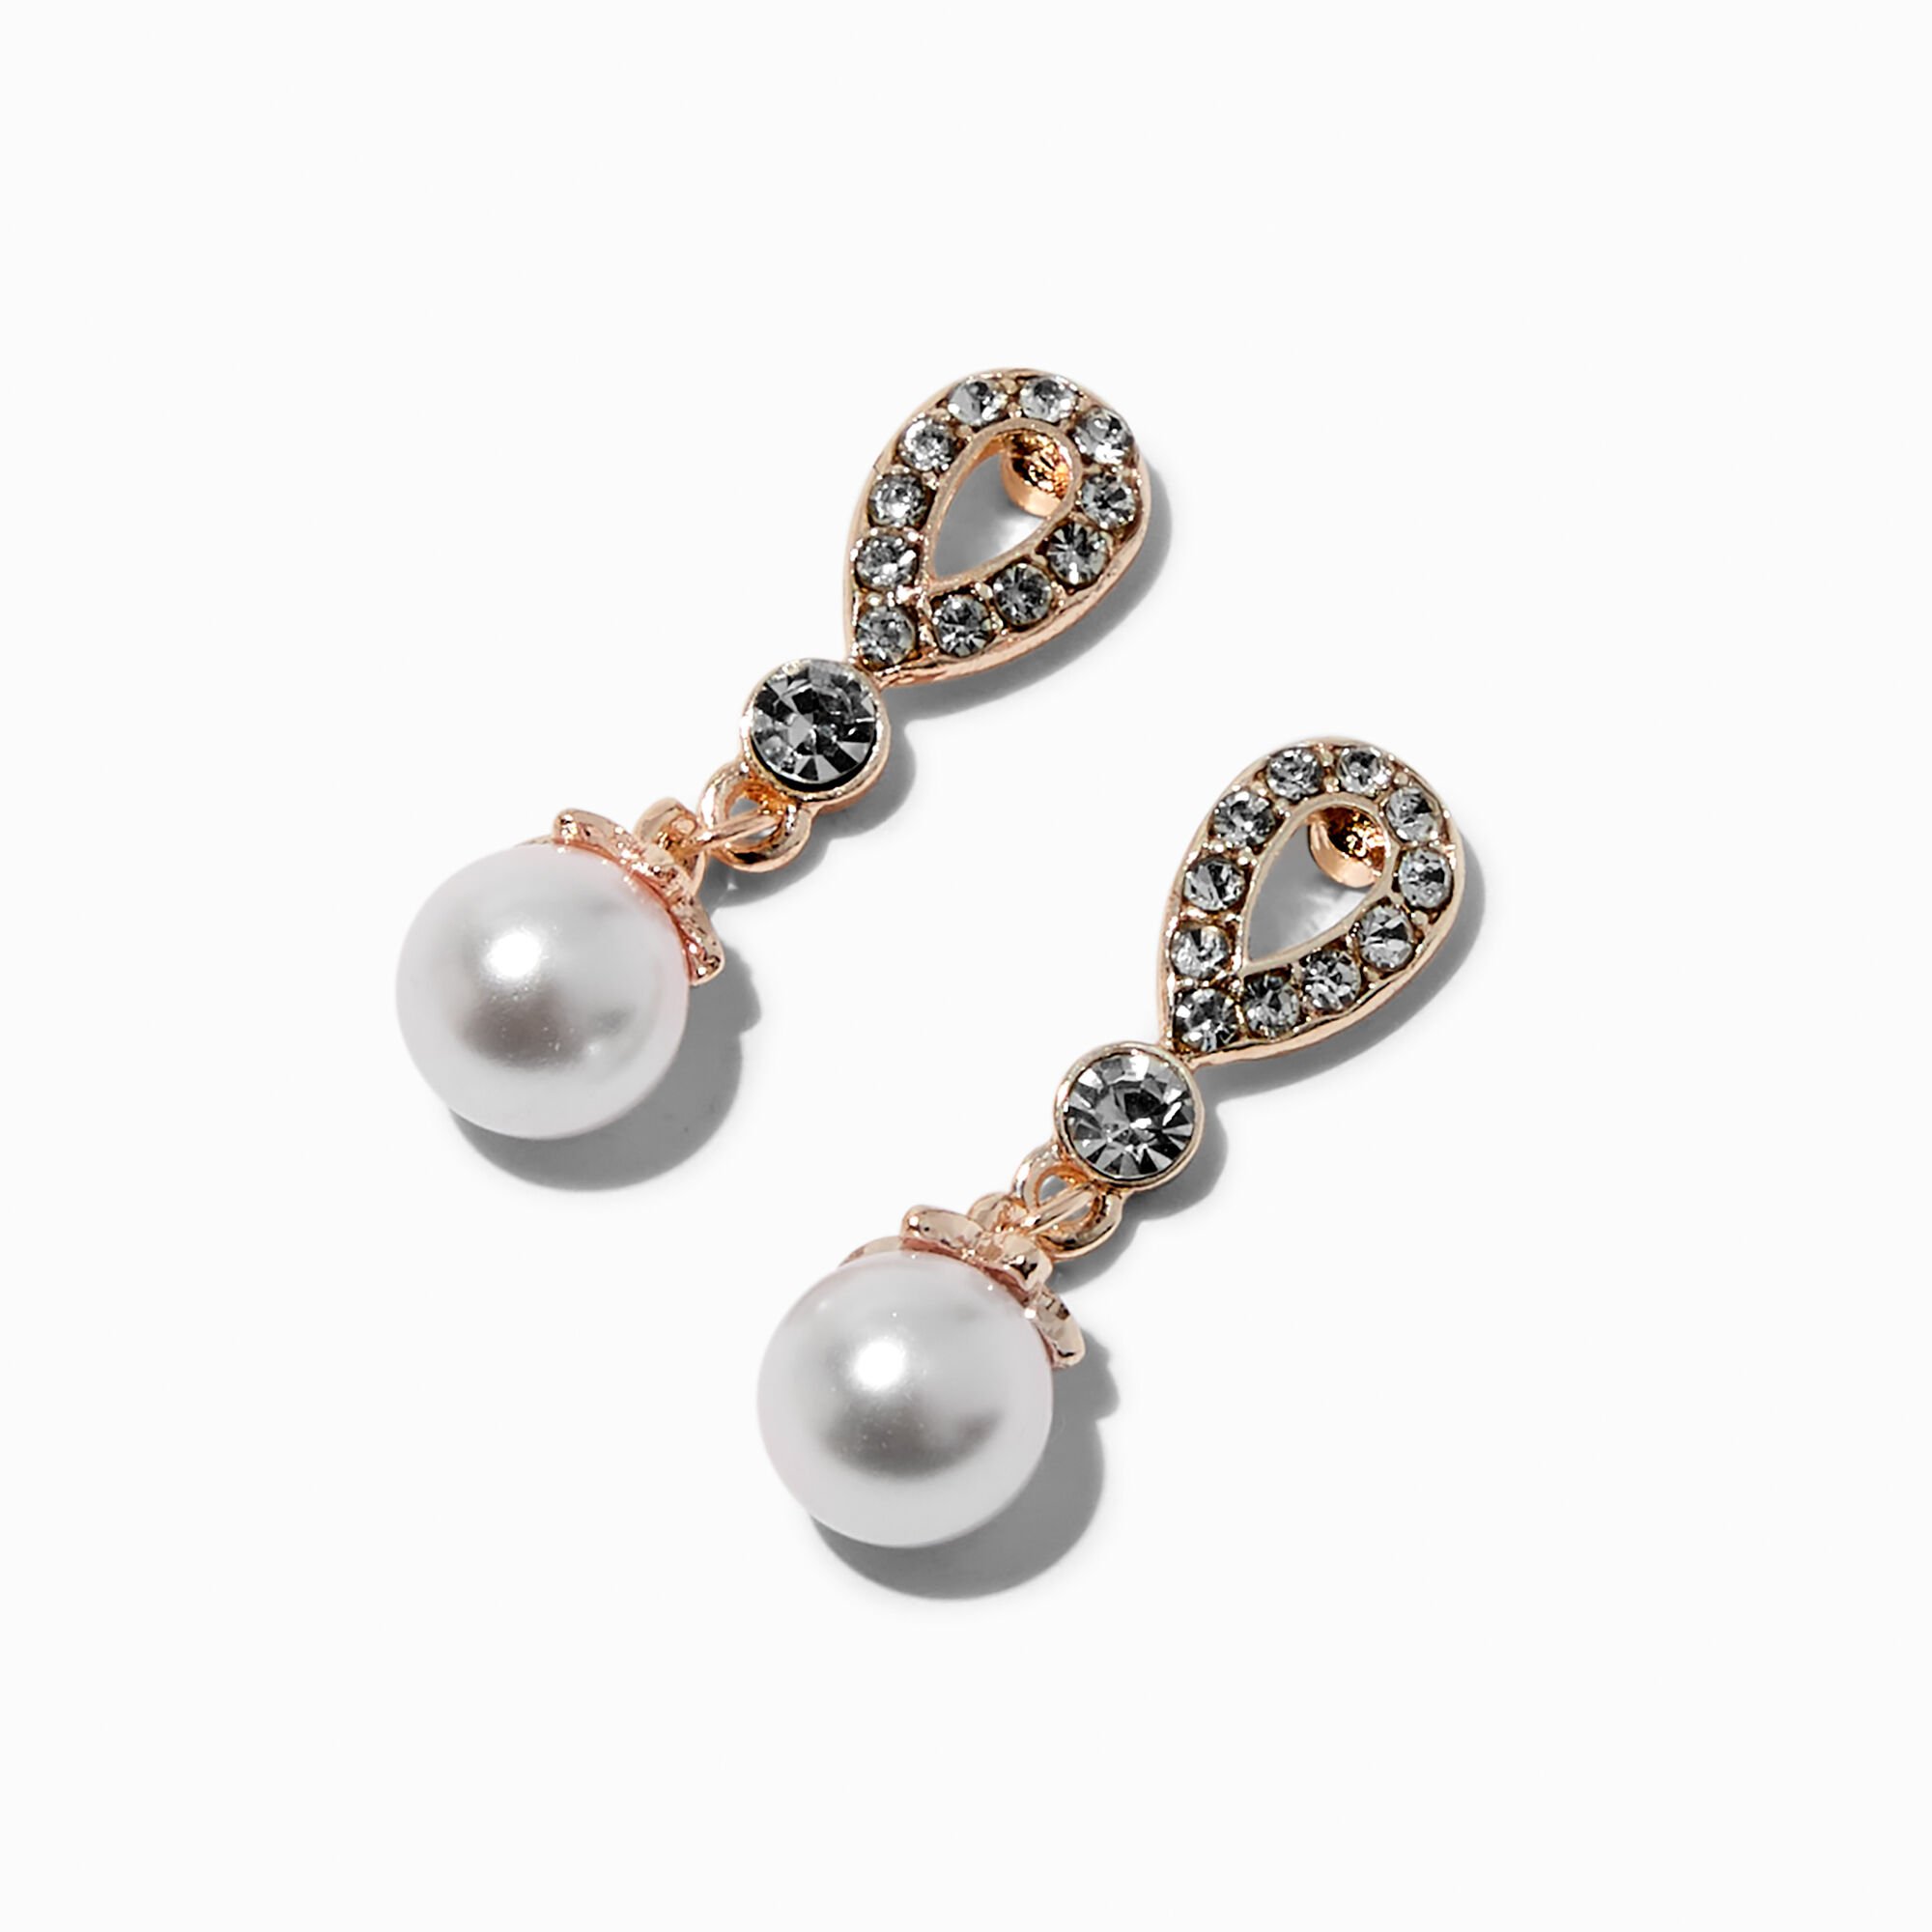 View Claires Tone Pearl Crystal 1 Drop Earrings Rose Gold information